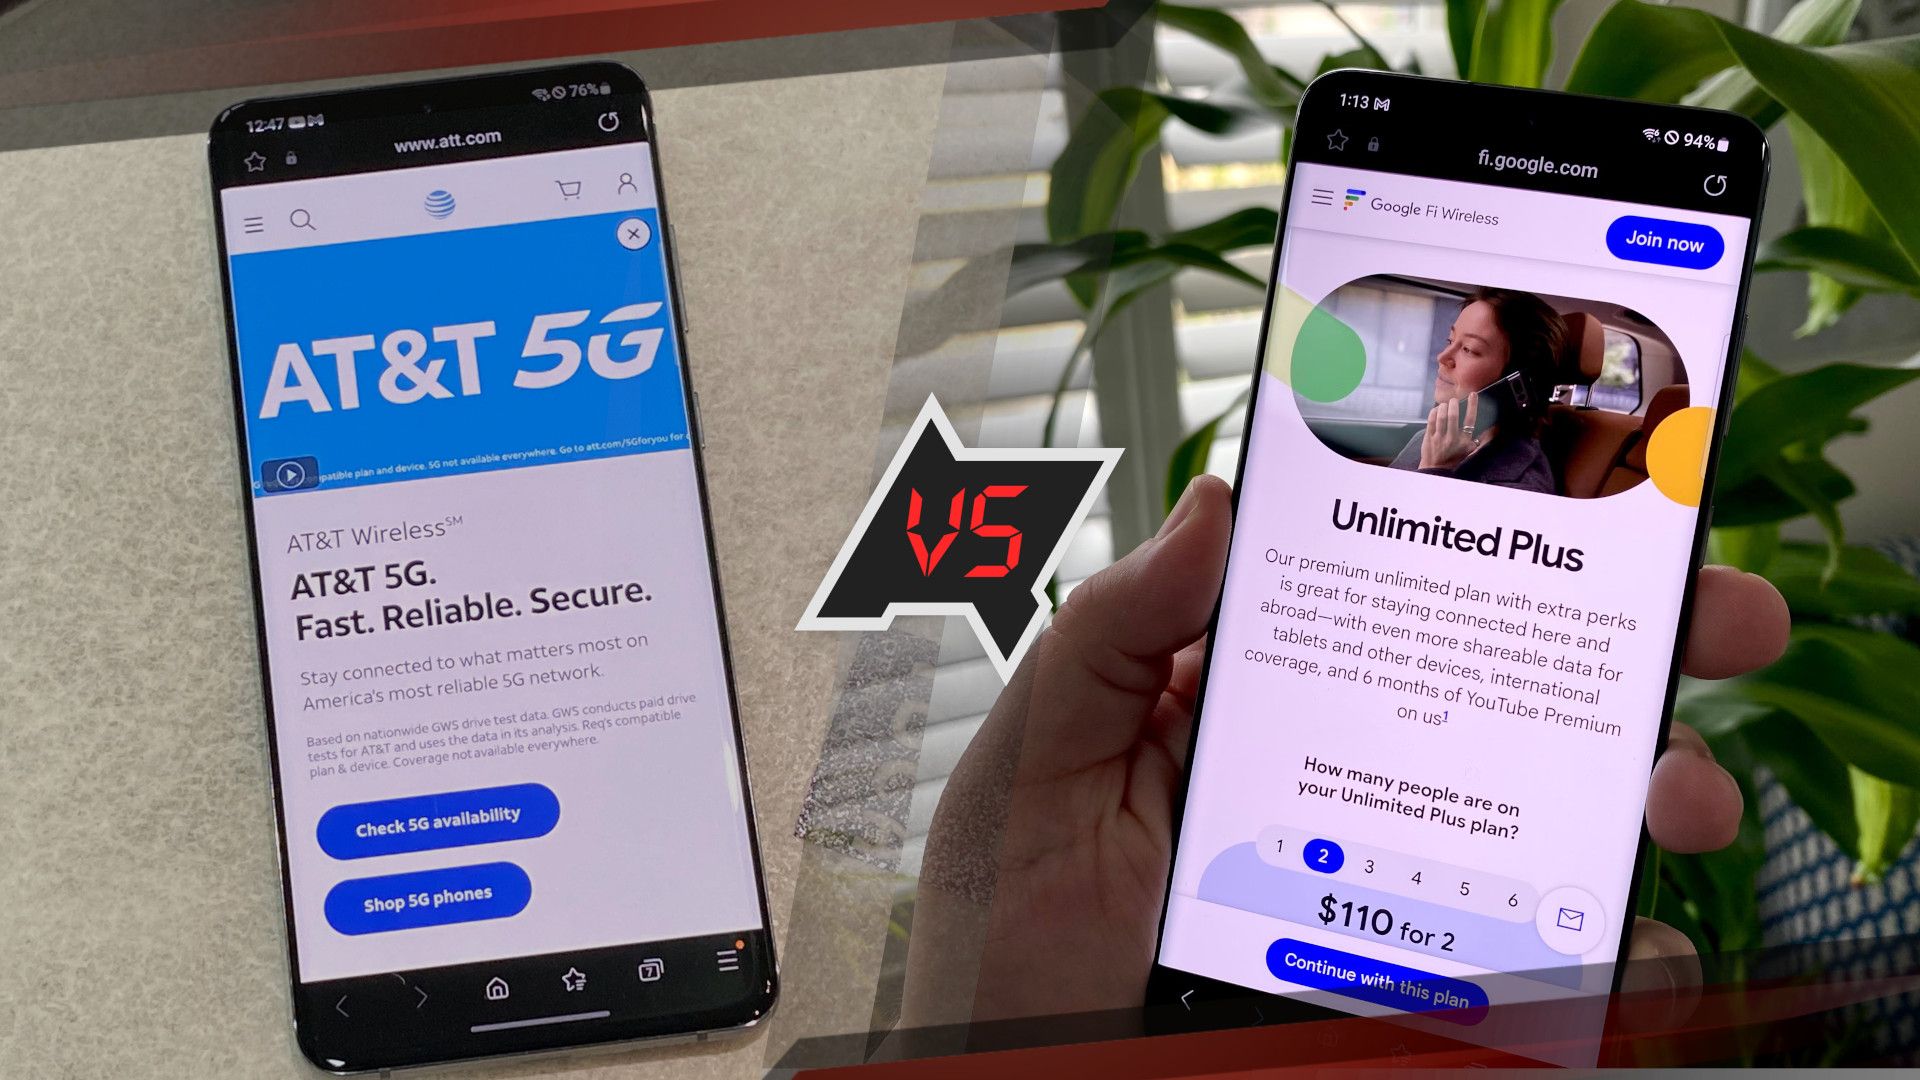 AT&T vs. Google Fi with web pages on a Galaxy phone